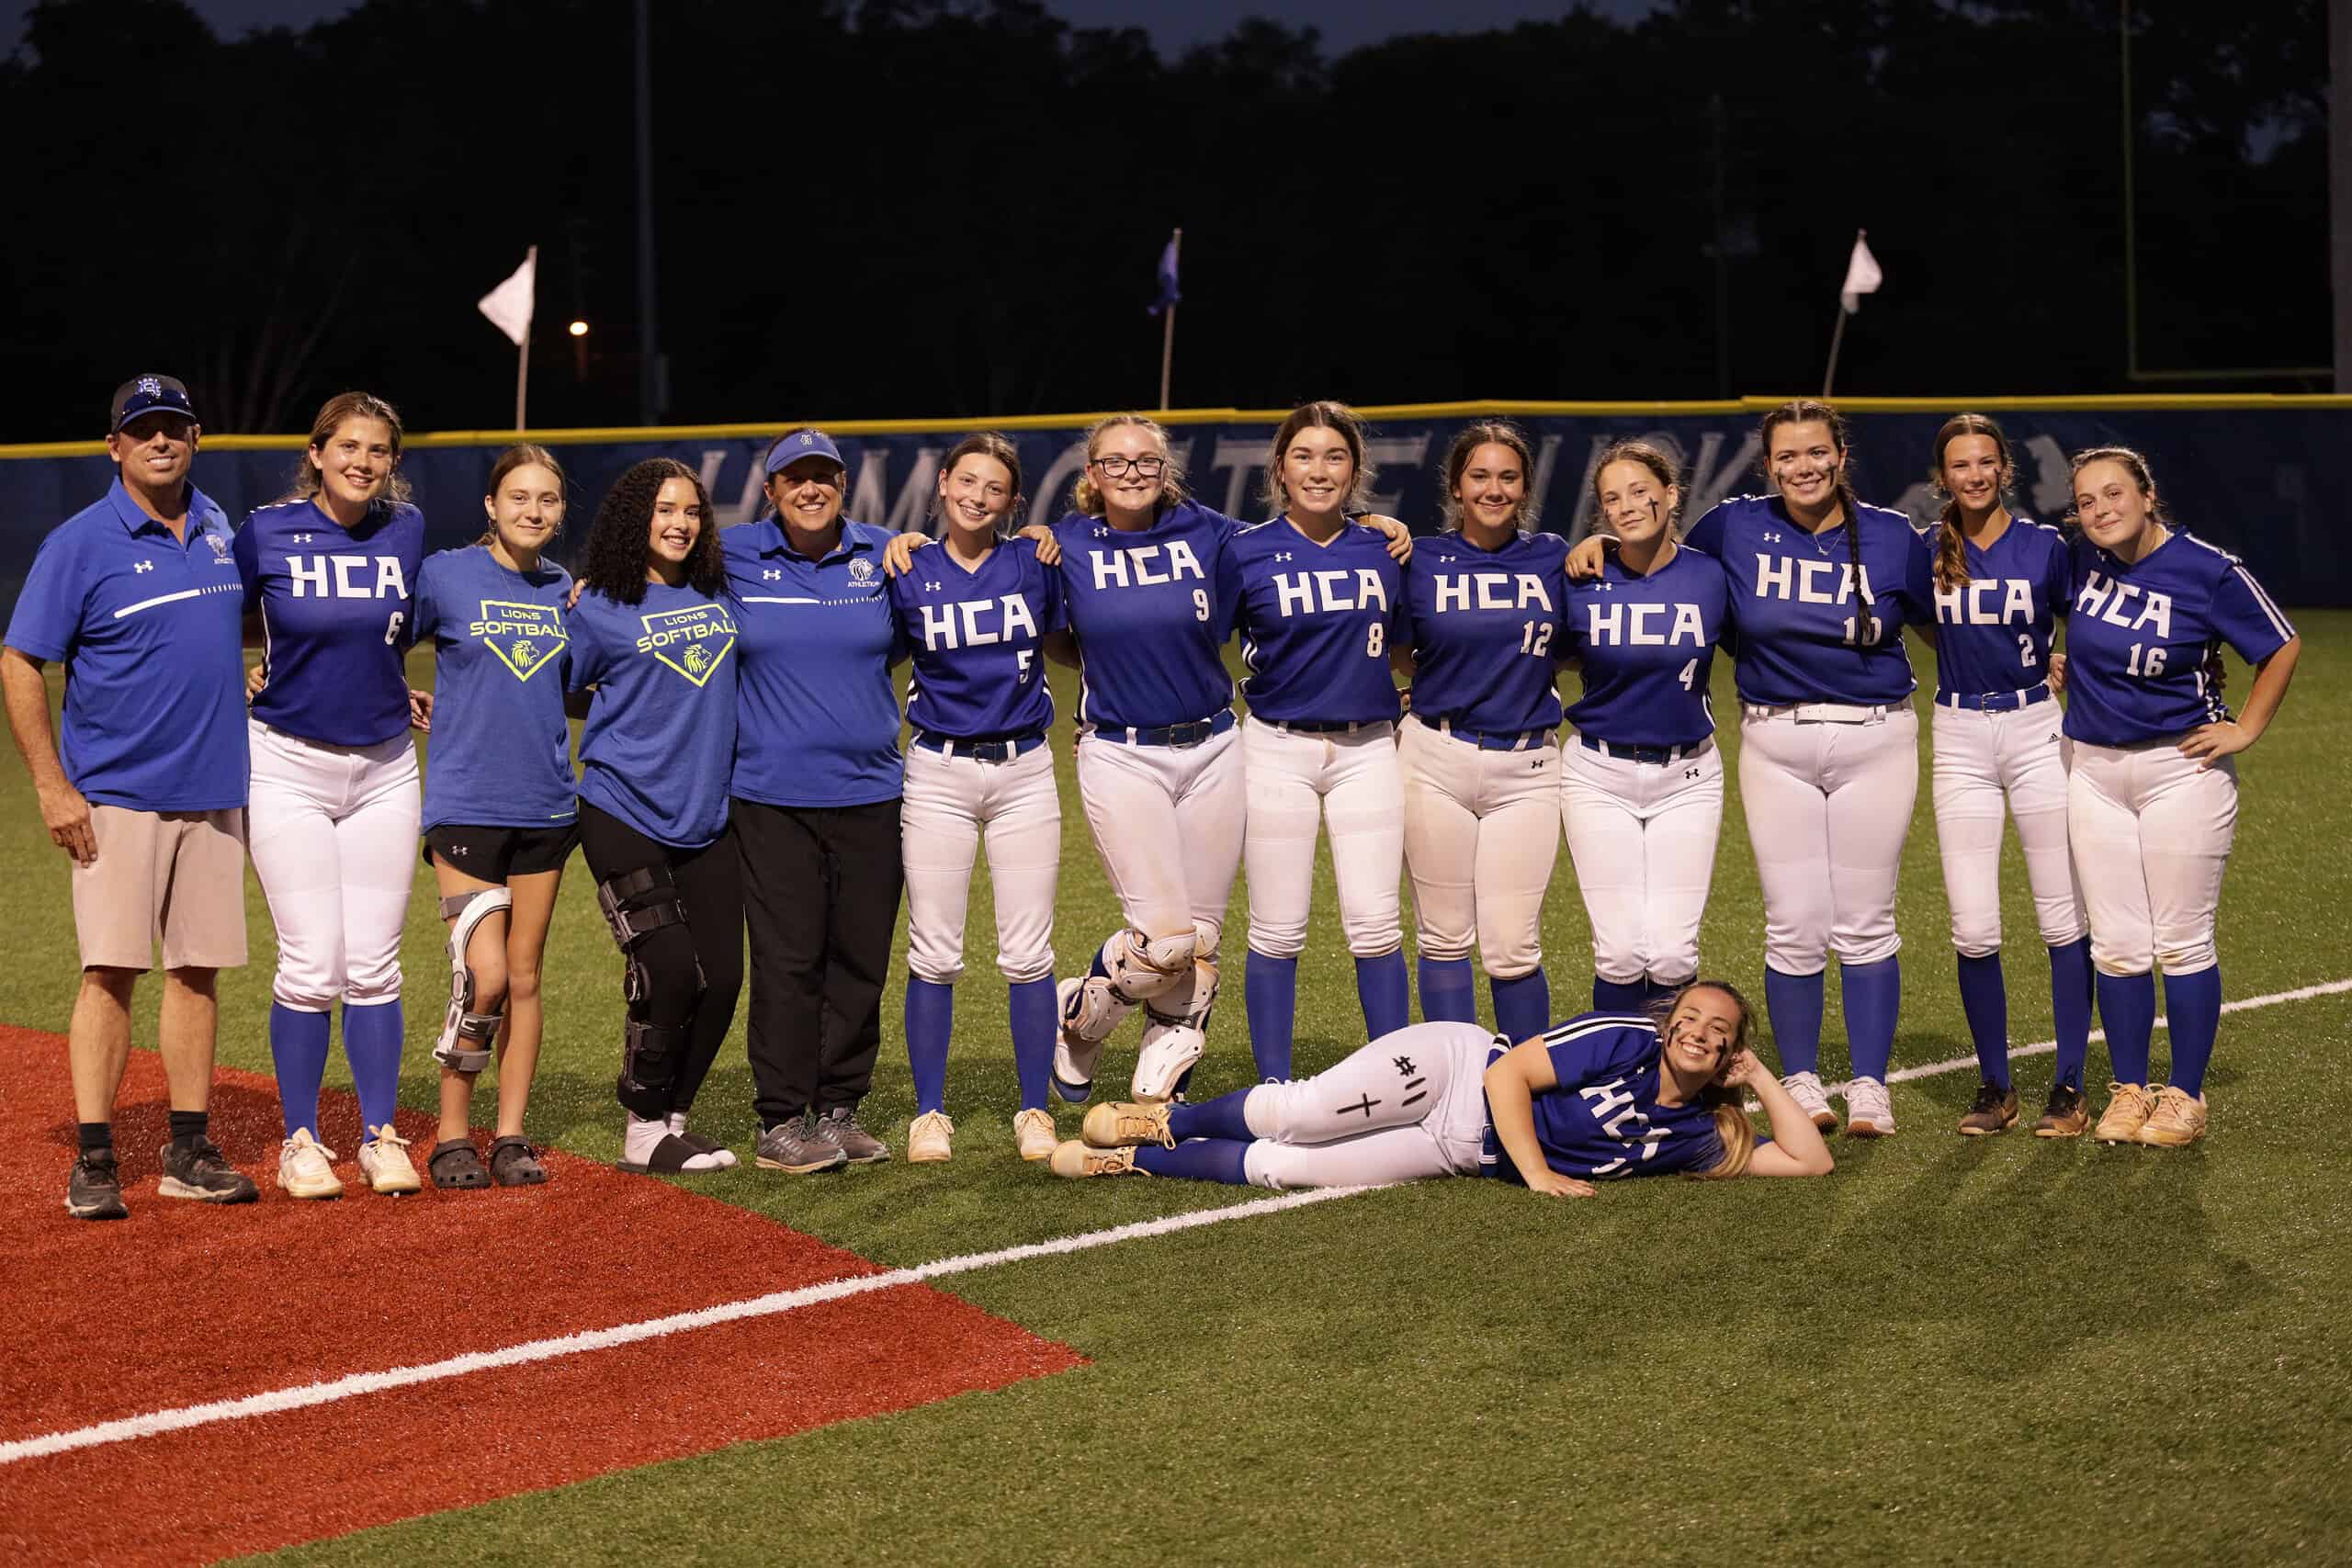 Team photo. From left to right, Assistant Coach Nick Miller, Kiley Graf, Emma Hendricks, Suriana Pabon, Head Coach Dianne Smith, Layla Miller, Piper Gill, Rae Easton, Angie Isner, Maria Bozman, Kaylana Lyons, Addy Slocum, Rachel Hendricks. (Breely Miller in front). [Photo Provided by Sean Gill]